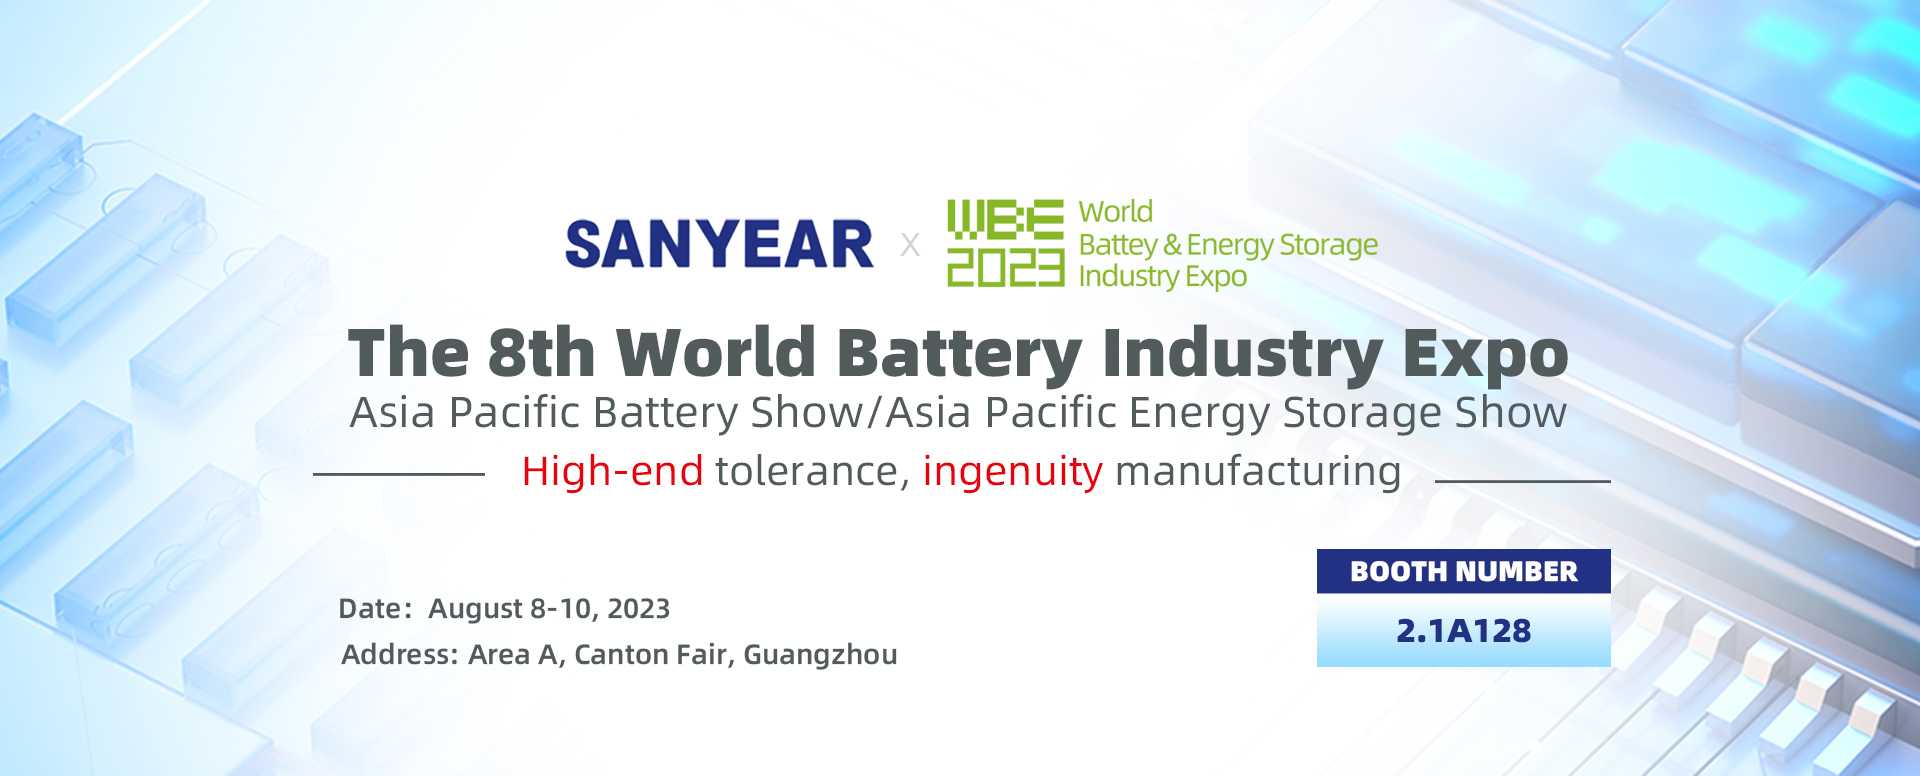 SANYEAR, the 8th World Battery Industry Expo, and Asia Pacific Battery Exhibition/Asia Pacific Energy Storage Exhibition